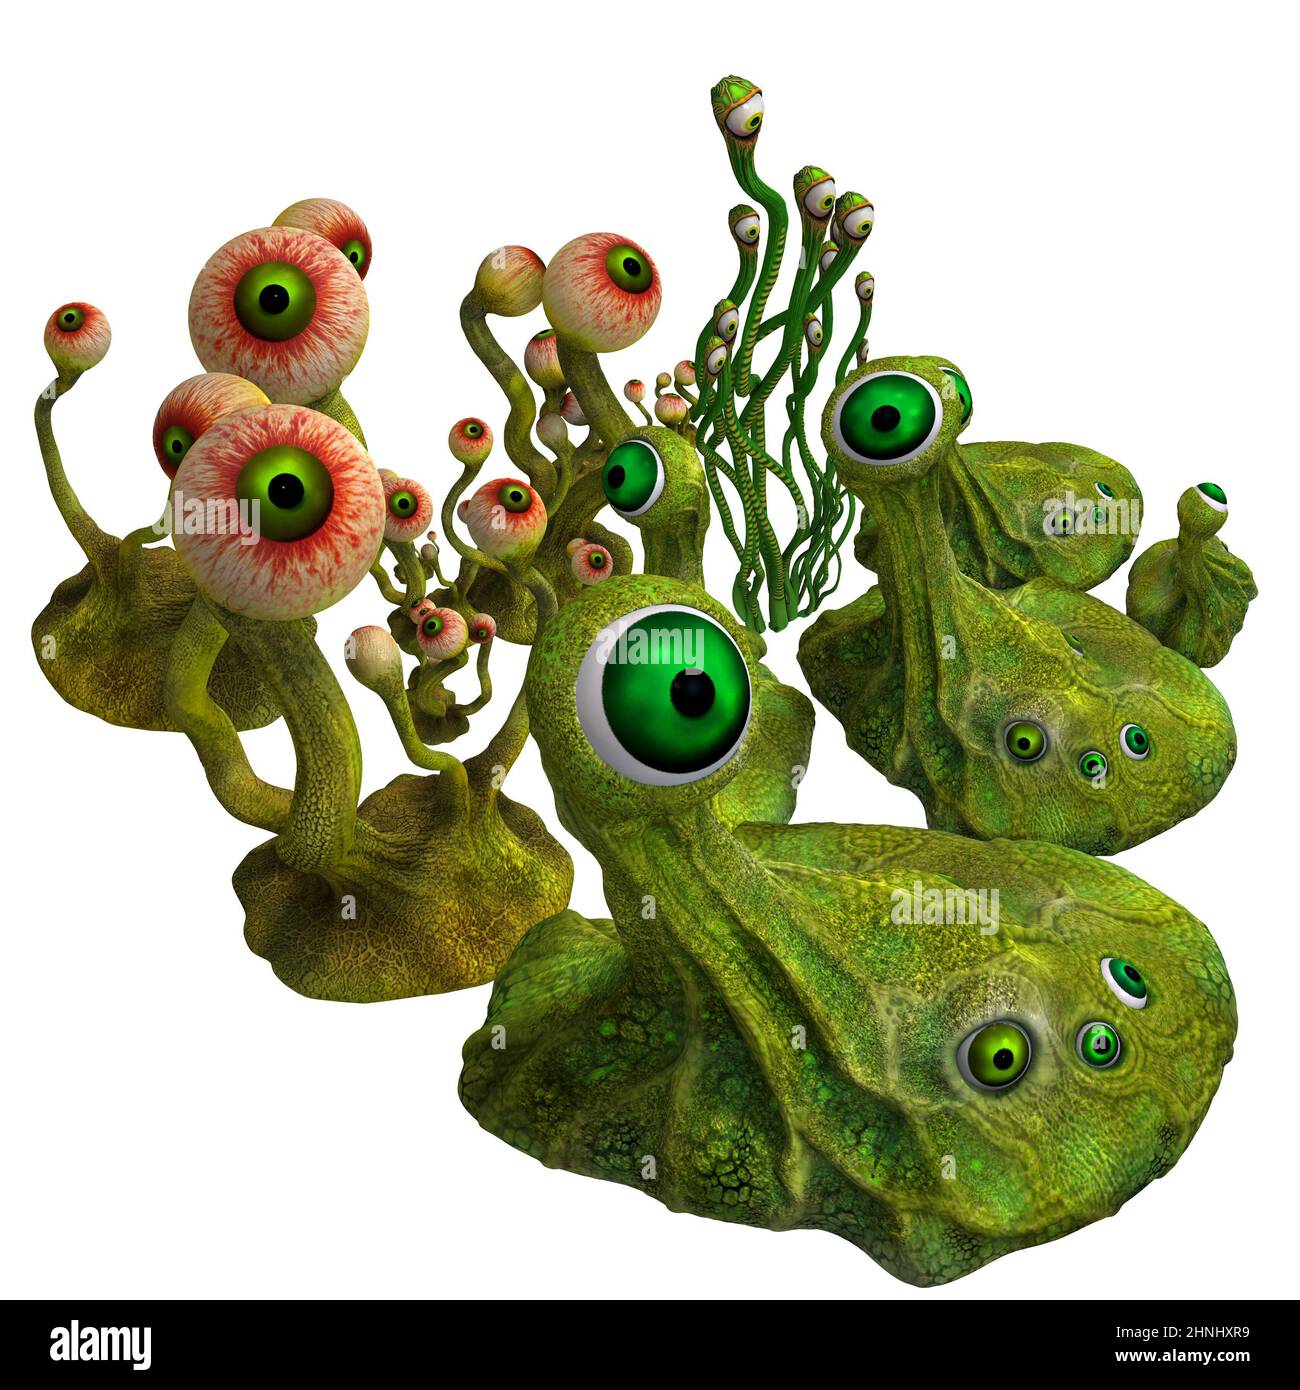 3d-illustration of an isolated fantasy eyball creature Stock Photo